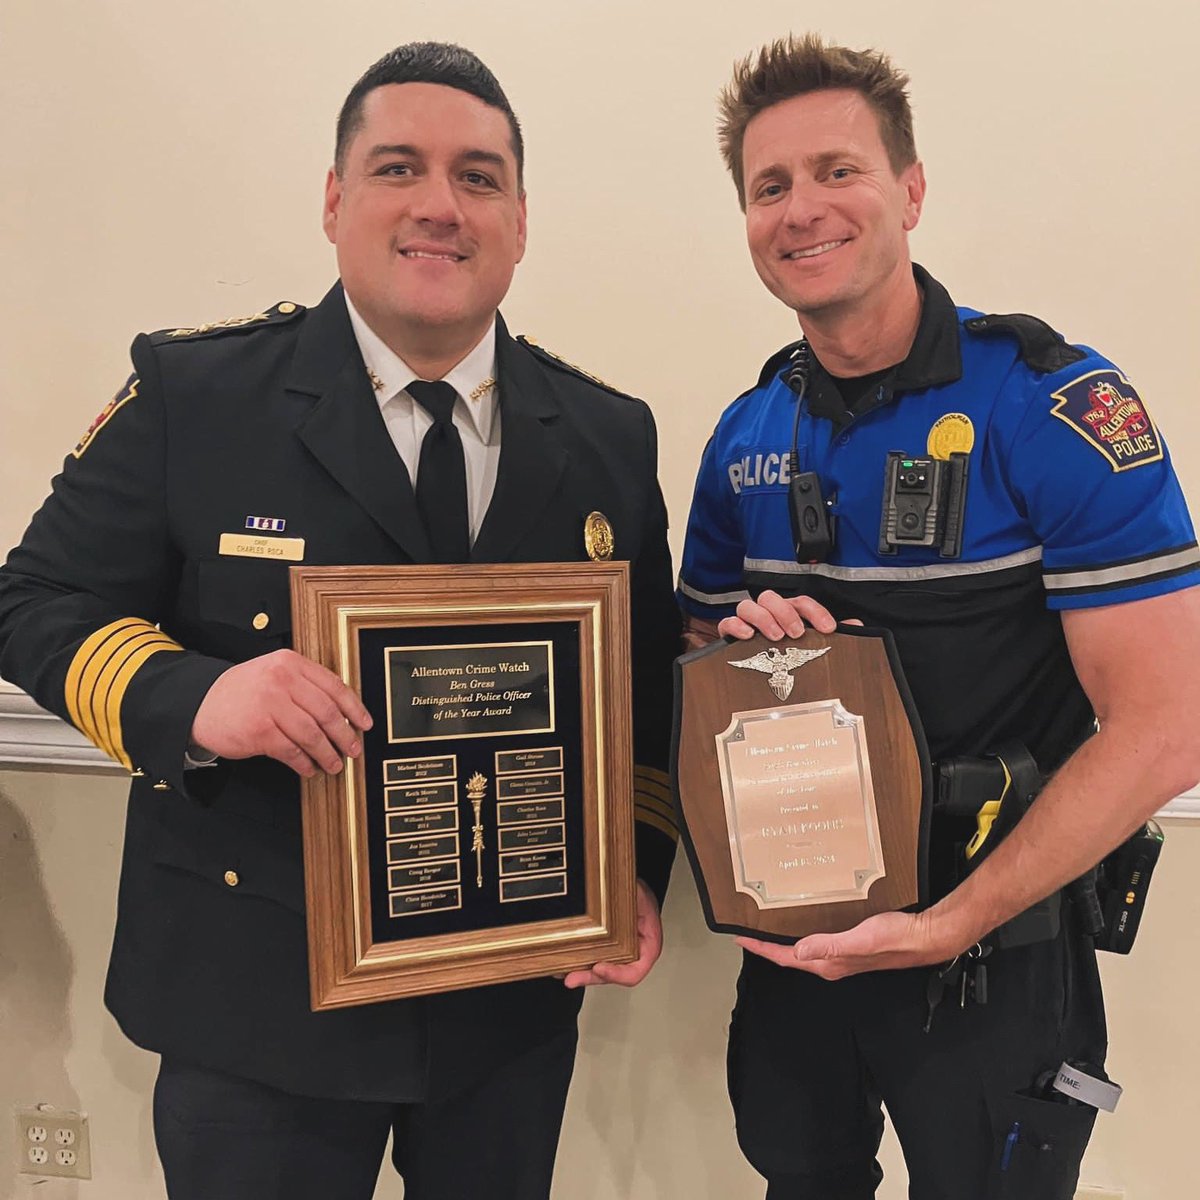 “Congratulations to Allentown Police Bike Officer Ryan Koons for receiving this year Ben Gress Distinguished Police Officer of the Year award at yesterday’s Allentown Crime Watch banquet, thank you for all your work and dedication to our department and community!” Chief Roca